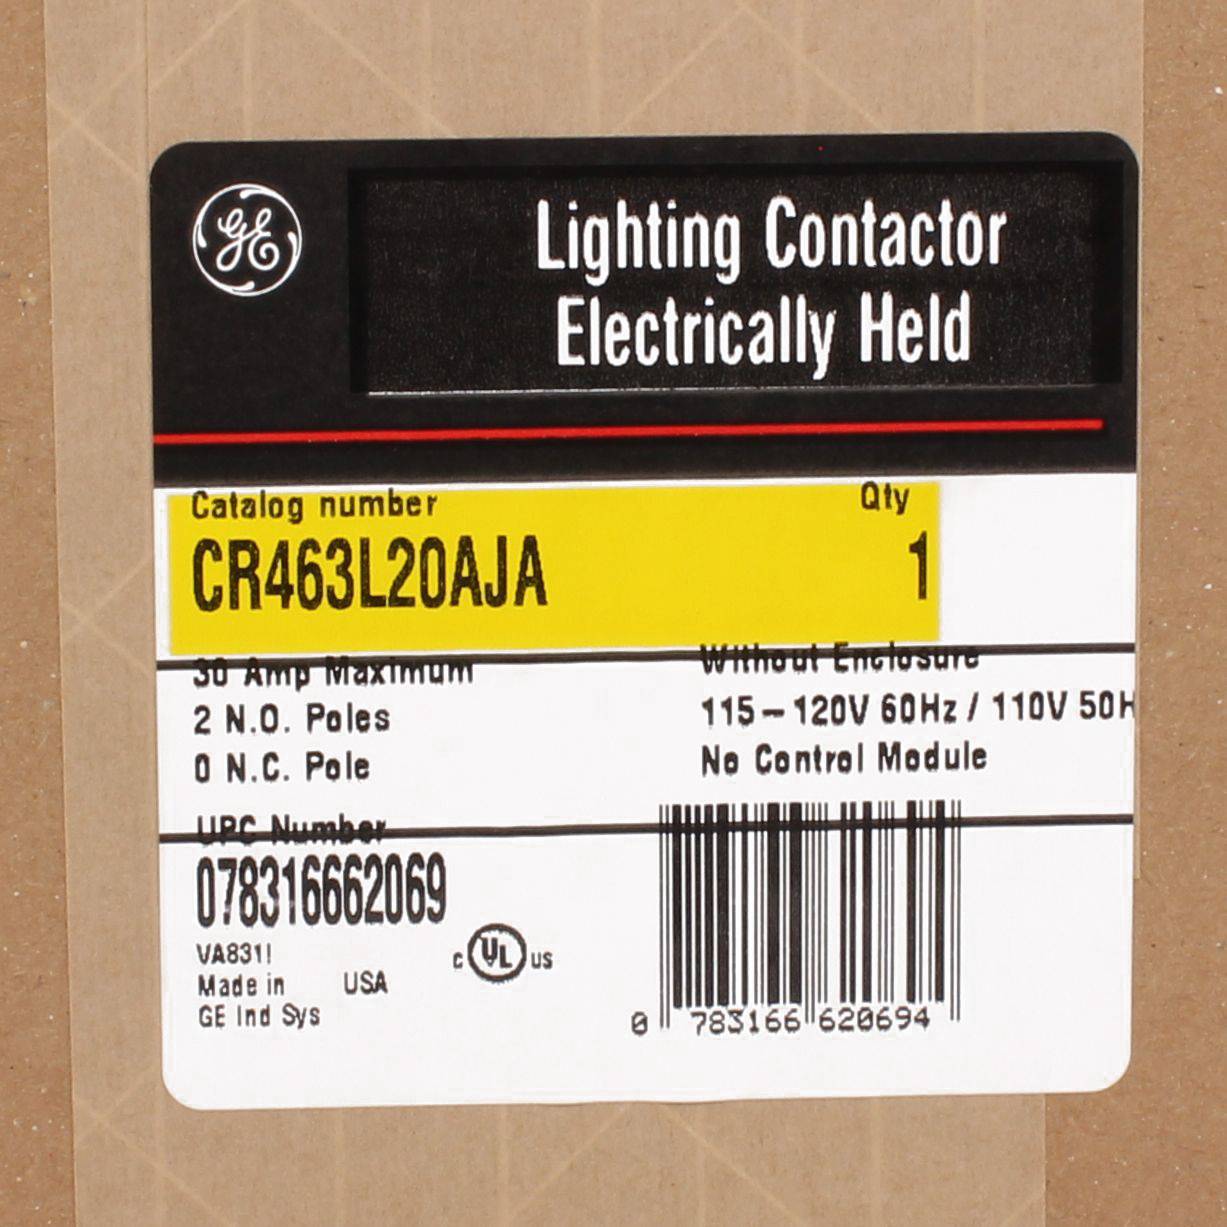 GE CR463L20AJA CR460 Electrically/Mechanically Held Lighting Contactor, 110/115 to 120 VAC V Coil, 30 A, 2NO Contact, 2 Poles